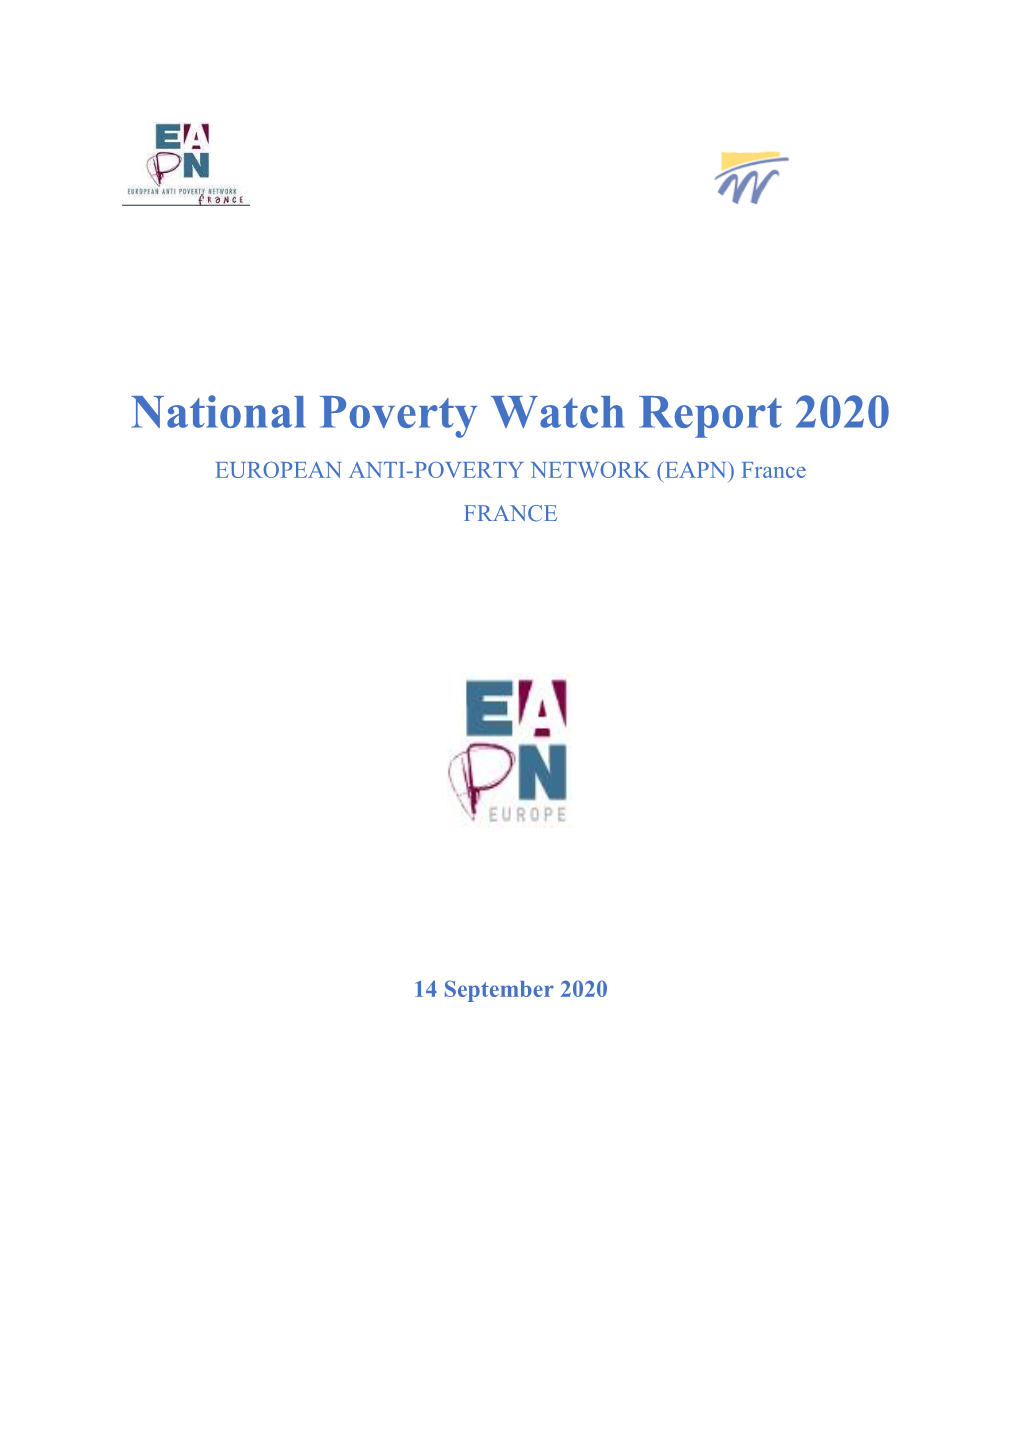 Read the France Poverty Watch